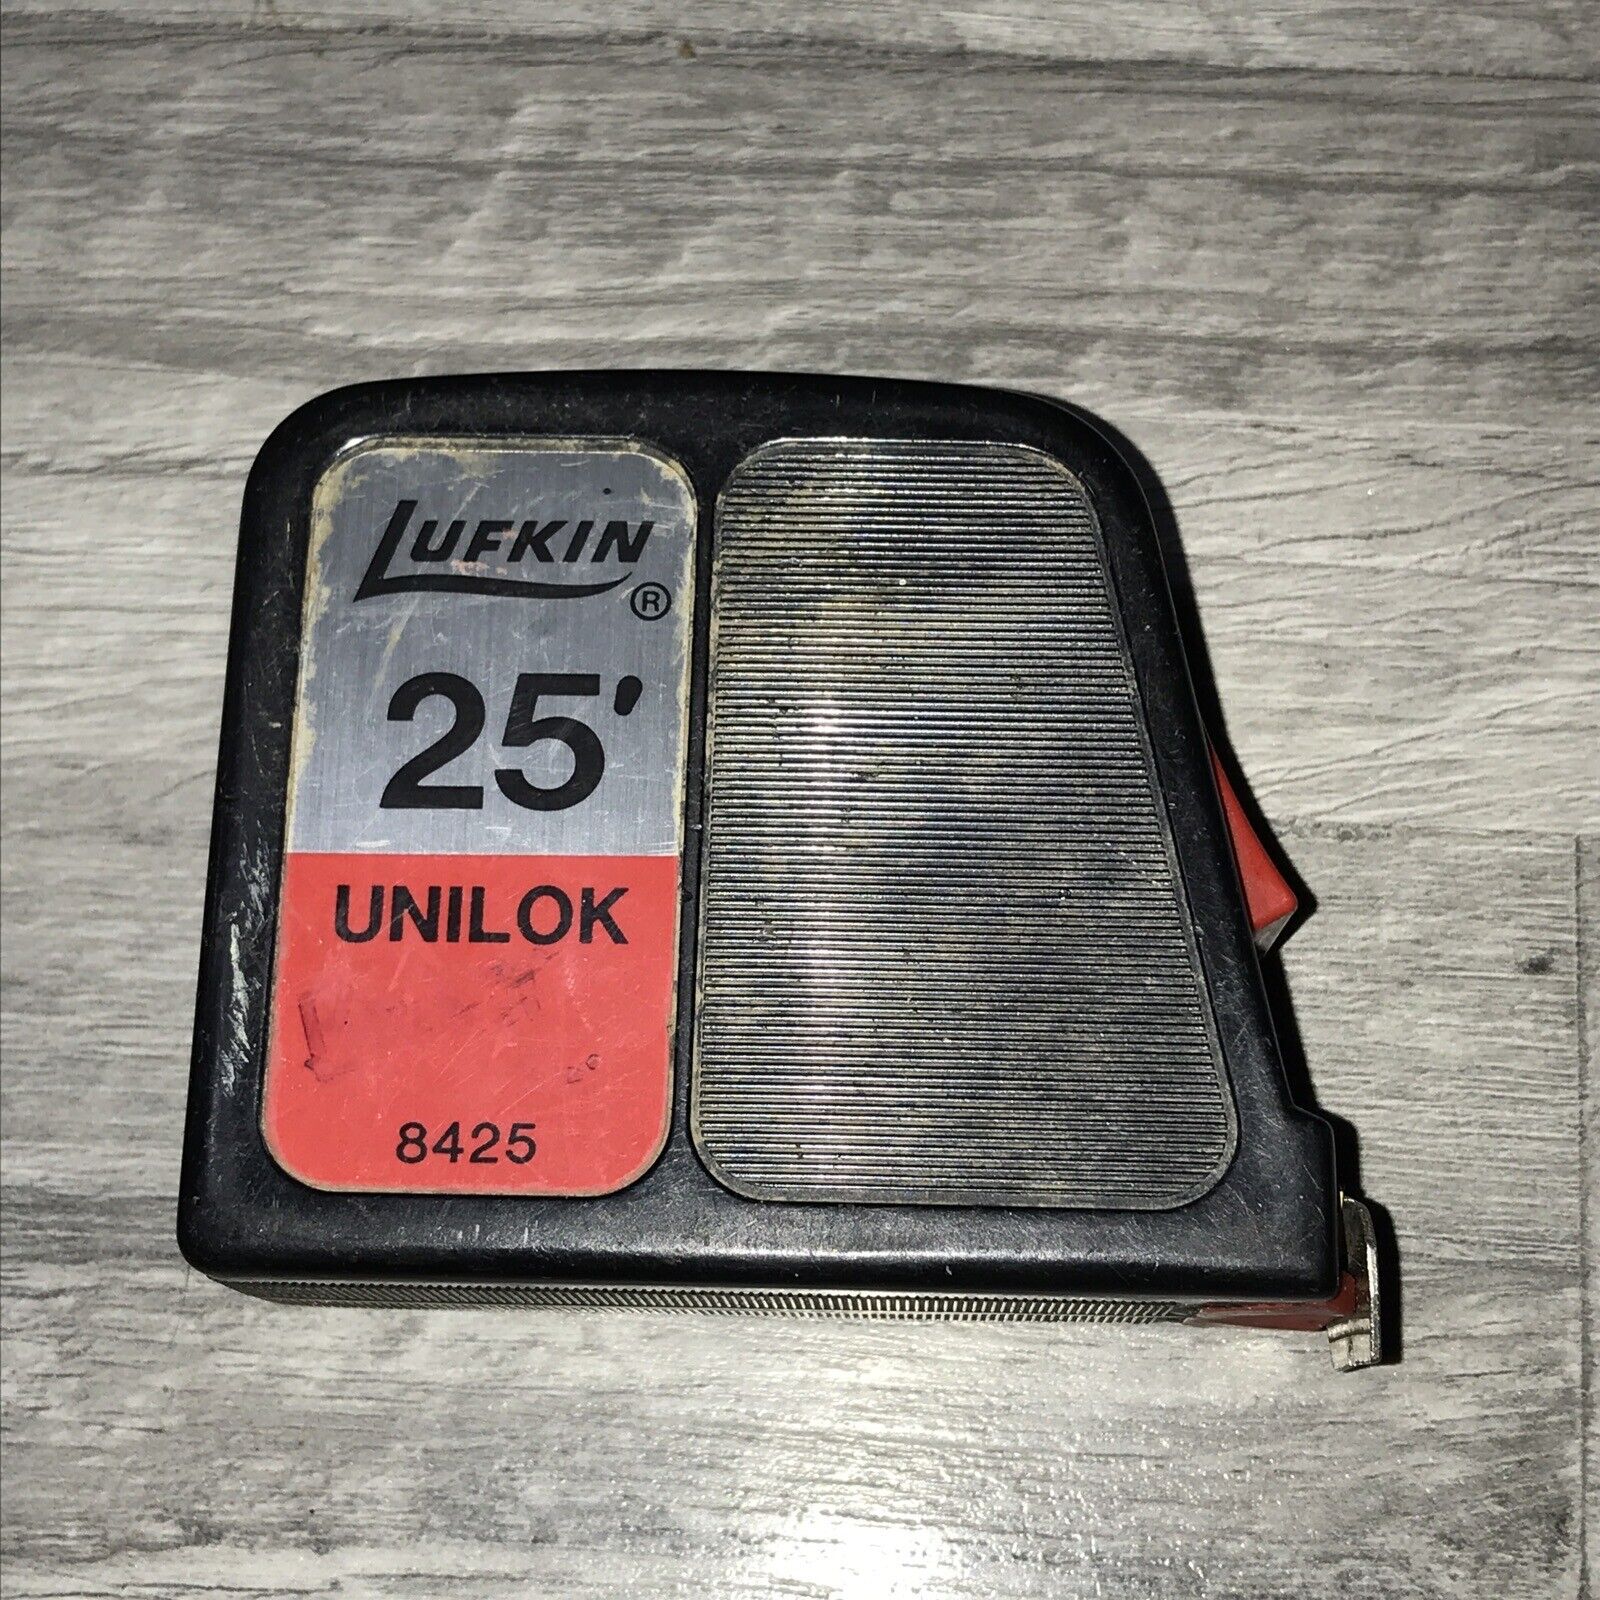 Vintage Lufkin 25' Foot Tape Measure - 8425 Made In USA W14